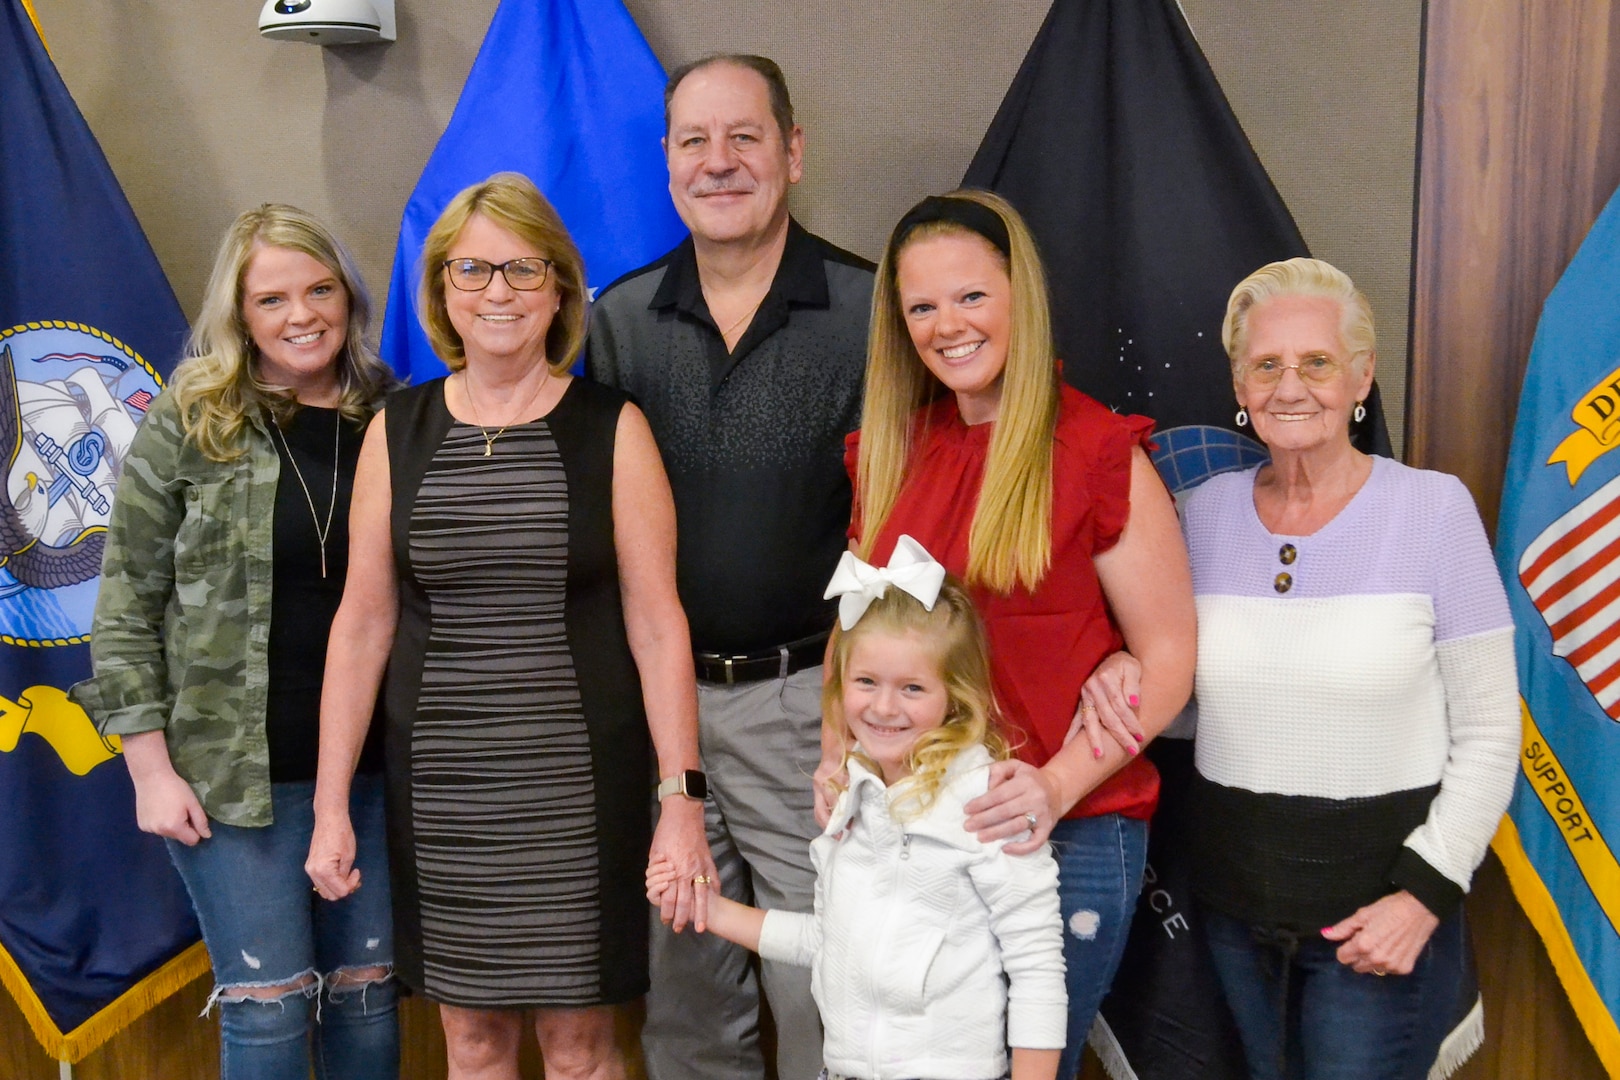 Shirley Keyser, second from left, poses with her family during her retirement ceremony at Defense Logistics Agency Troop Support March 21, 2022, in Philadelphia. Kyser is retiring after 31 years of service with the organization.